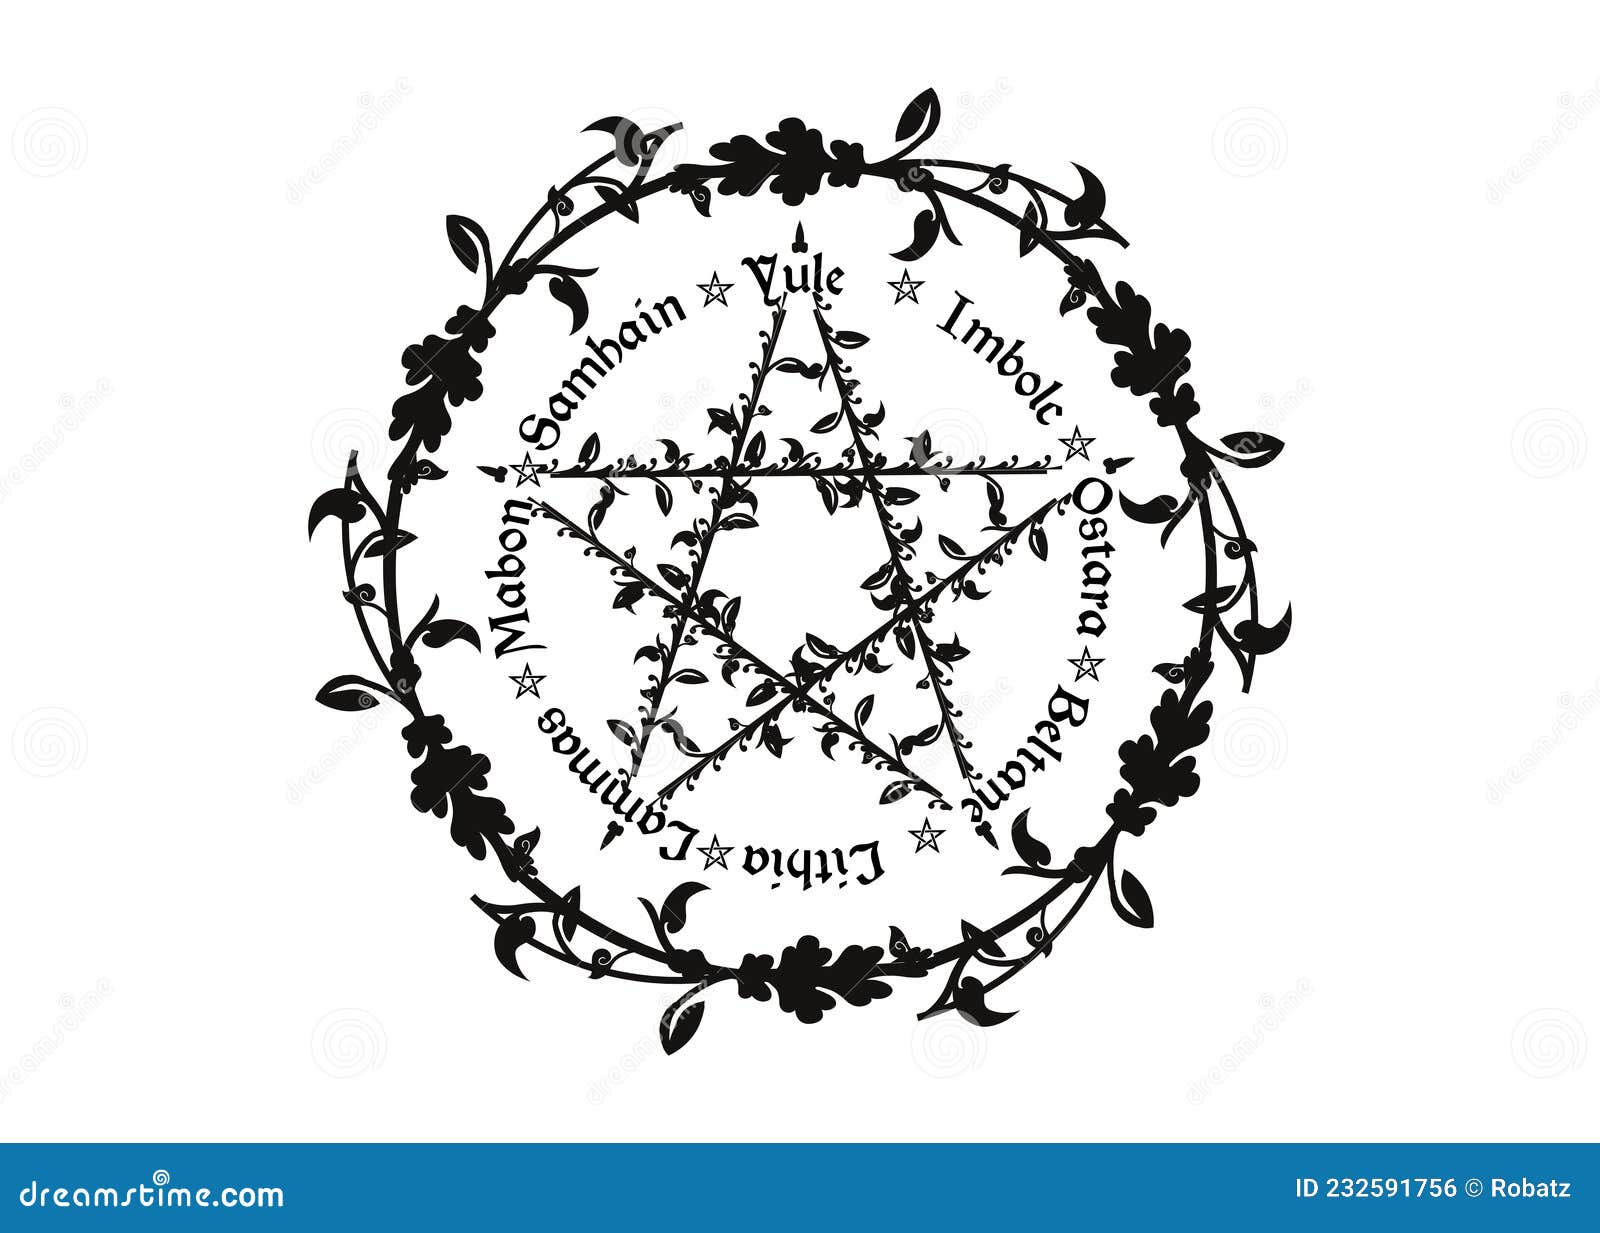 wheel of the year is an annual cycle of seasonal festivals. wiccan calendar and holidays. compass with pentagram with flowers